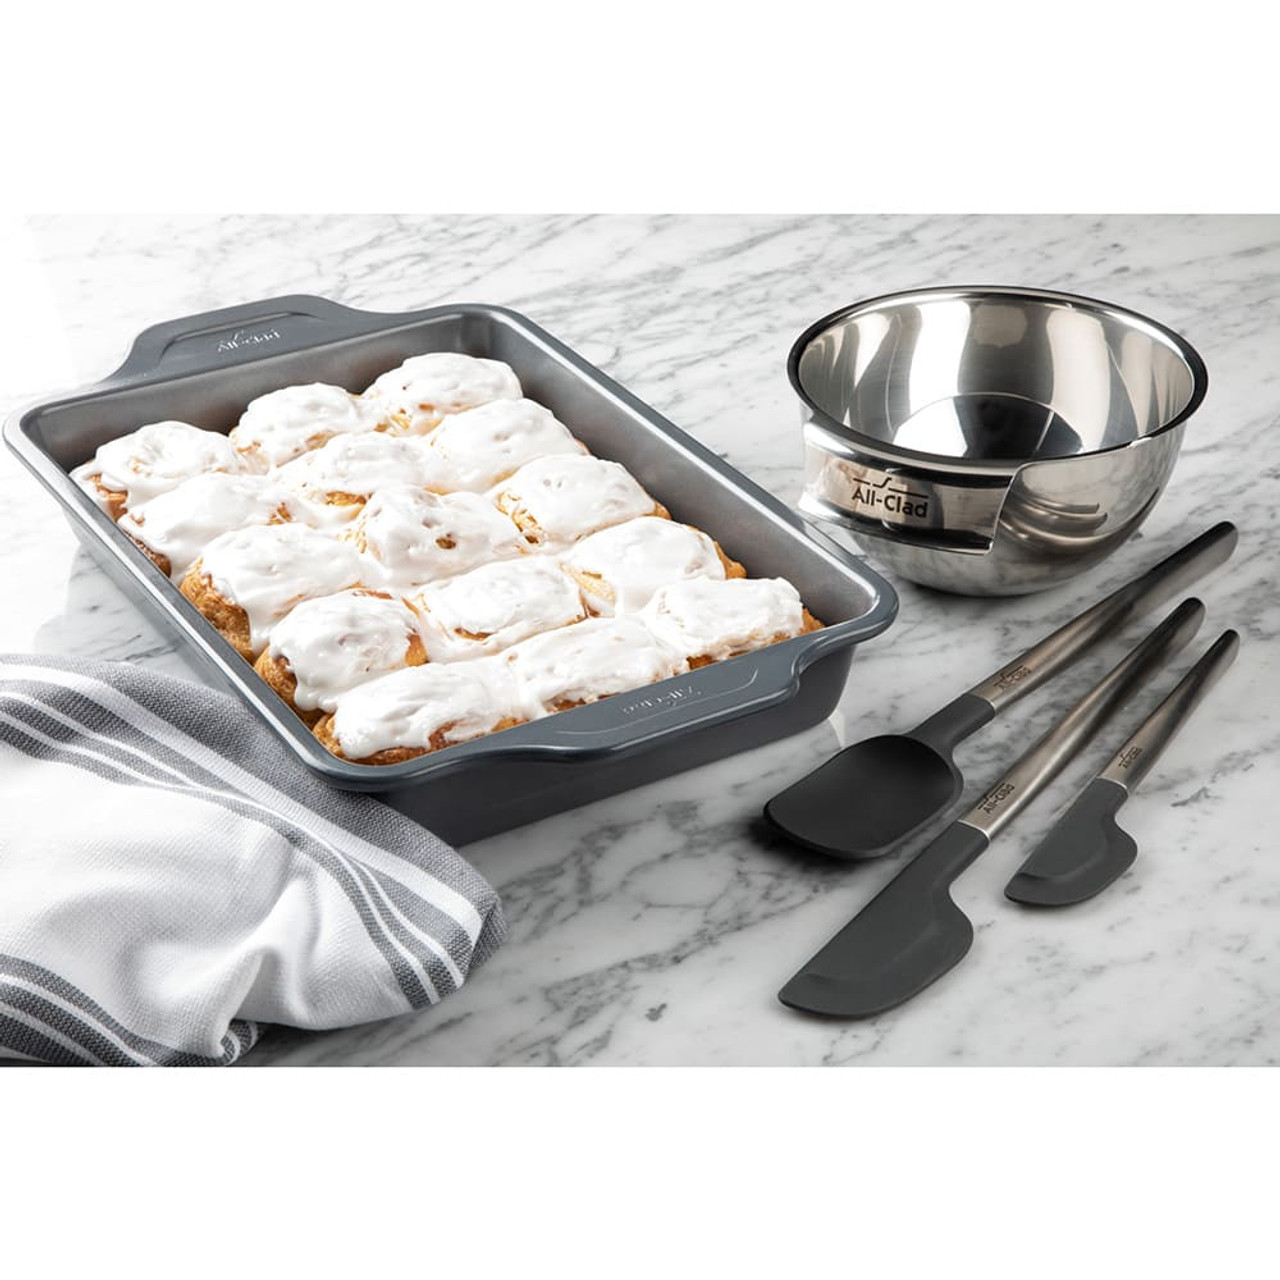 https://cdn11.bigcommerce.com/s-hccytny0od/images/stencil/1280x1280/products/3284/11752/all-clad-pro-release-rectangular-baking-pan-1__13033.1589538797.jpg?c=2?imbypass=on